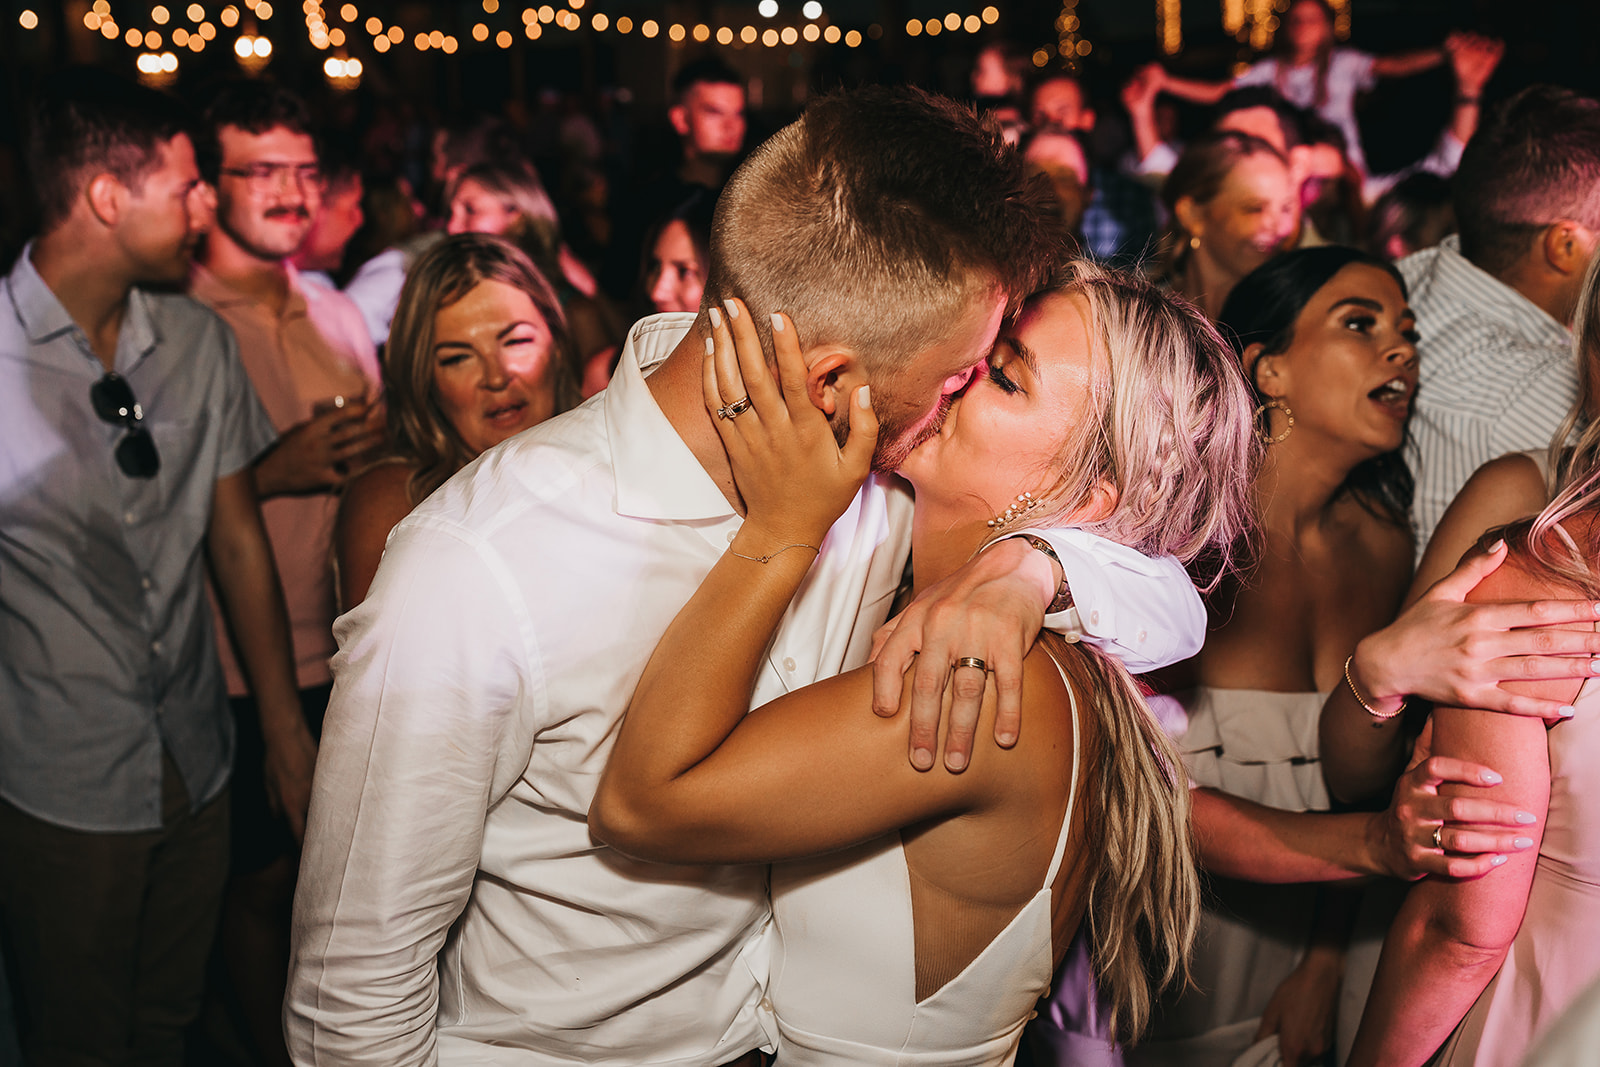 Bride and groom starting to party and have a blast at wedding reception and sharing a special kiss